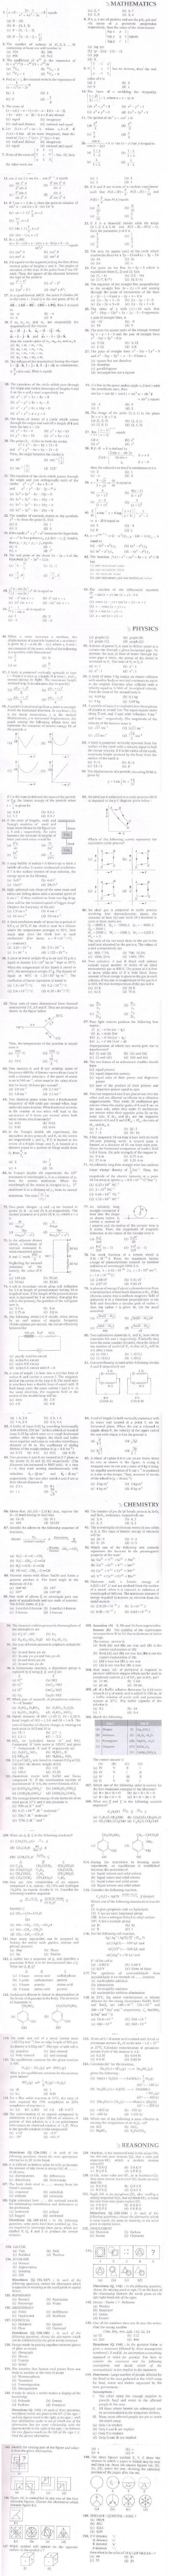 BITSAT 2009 Question Paper with Answers